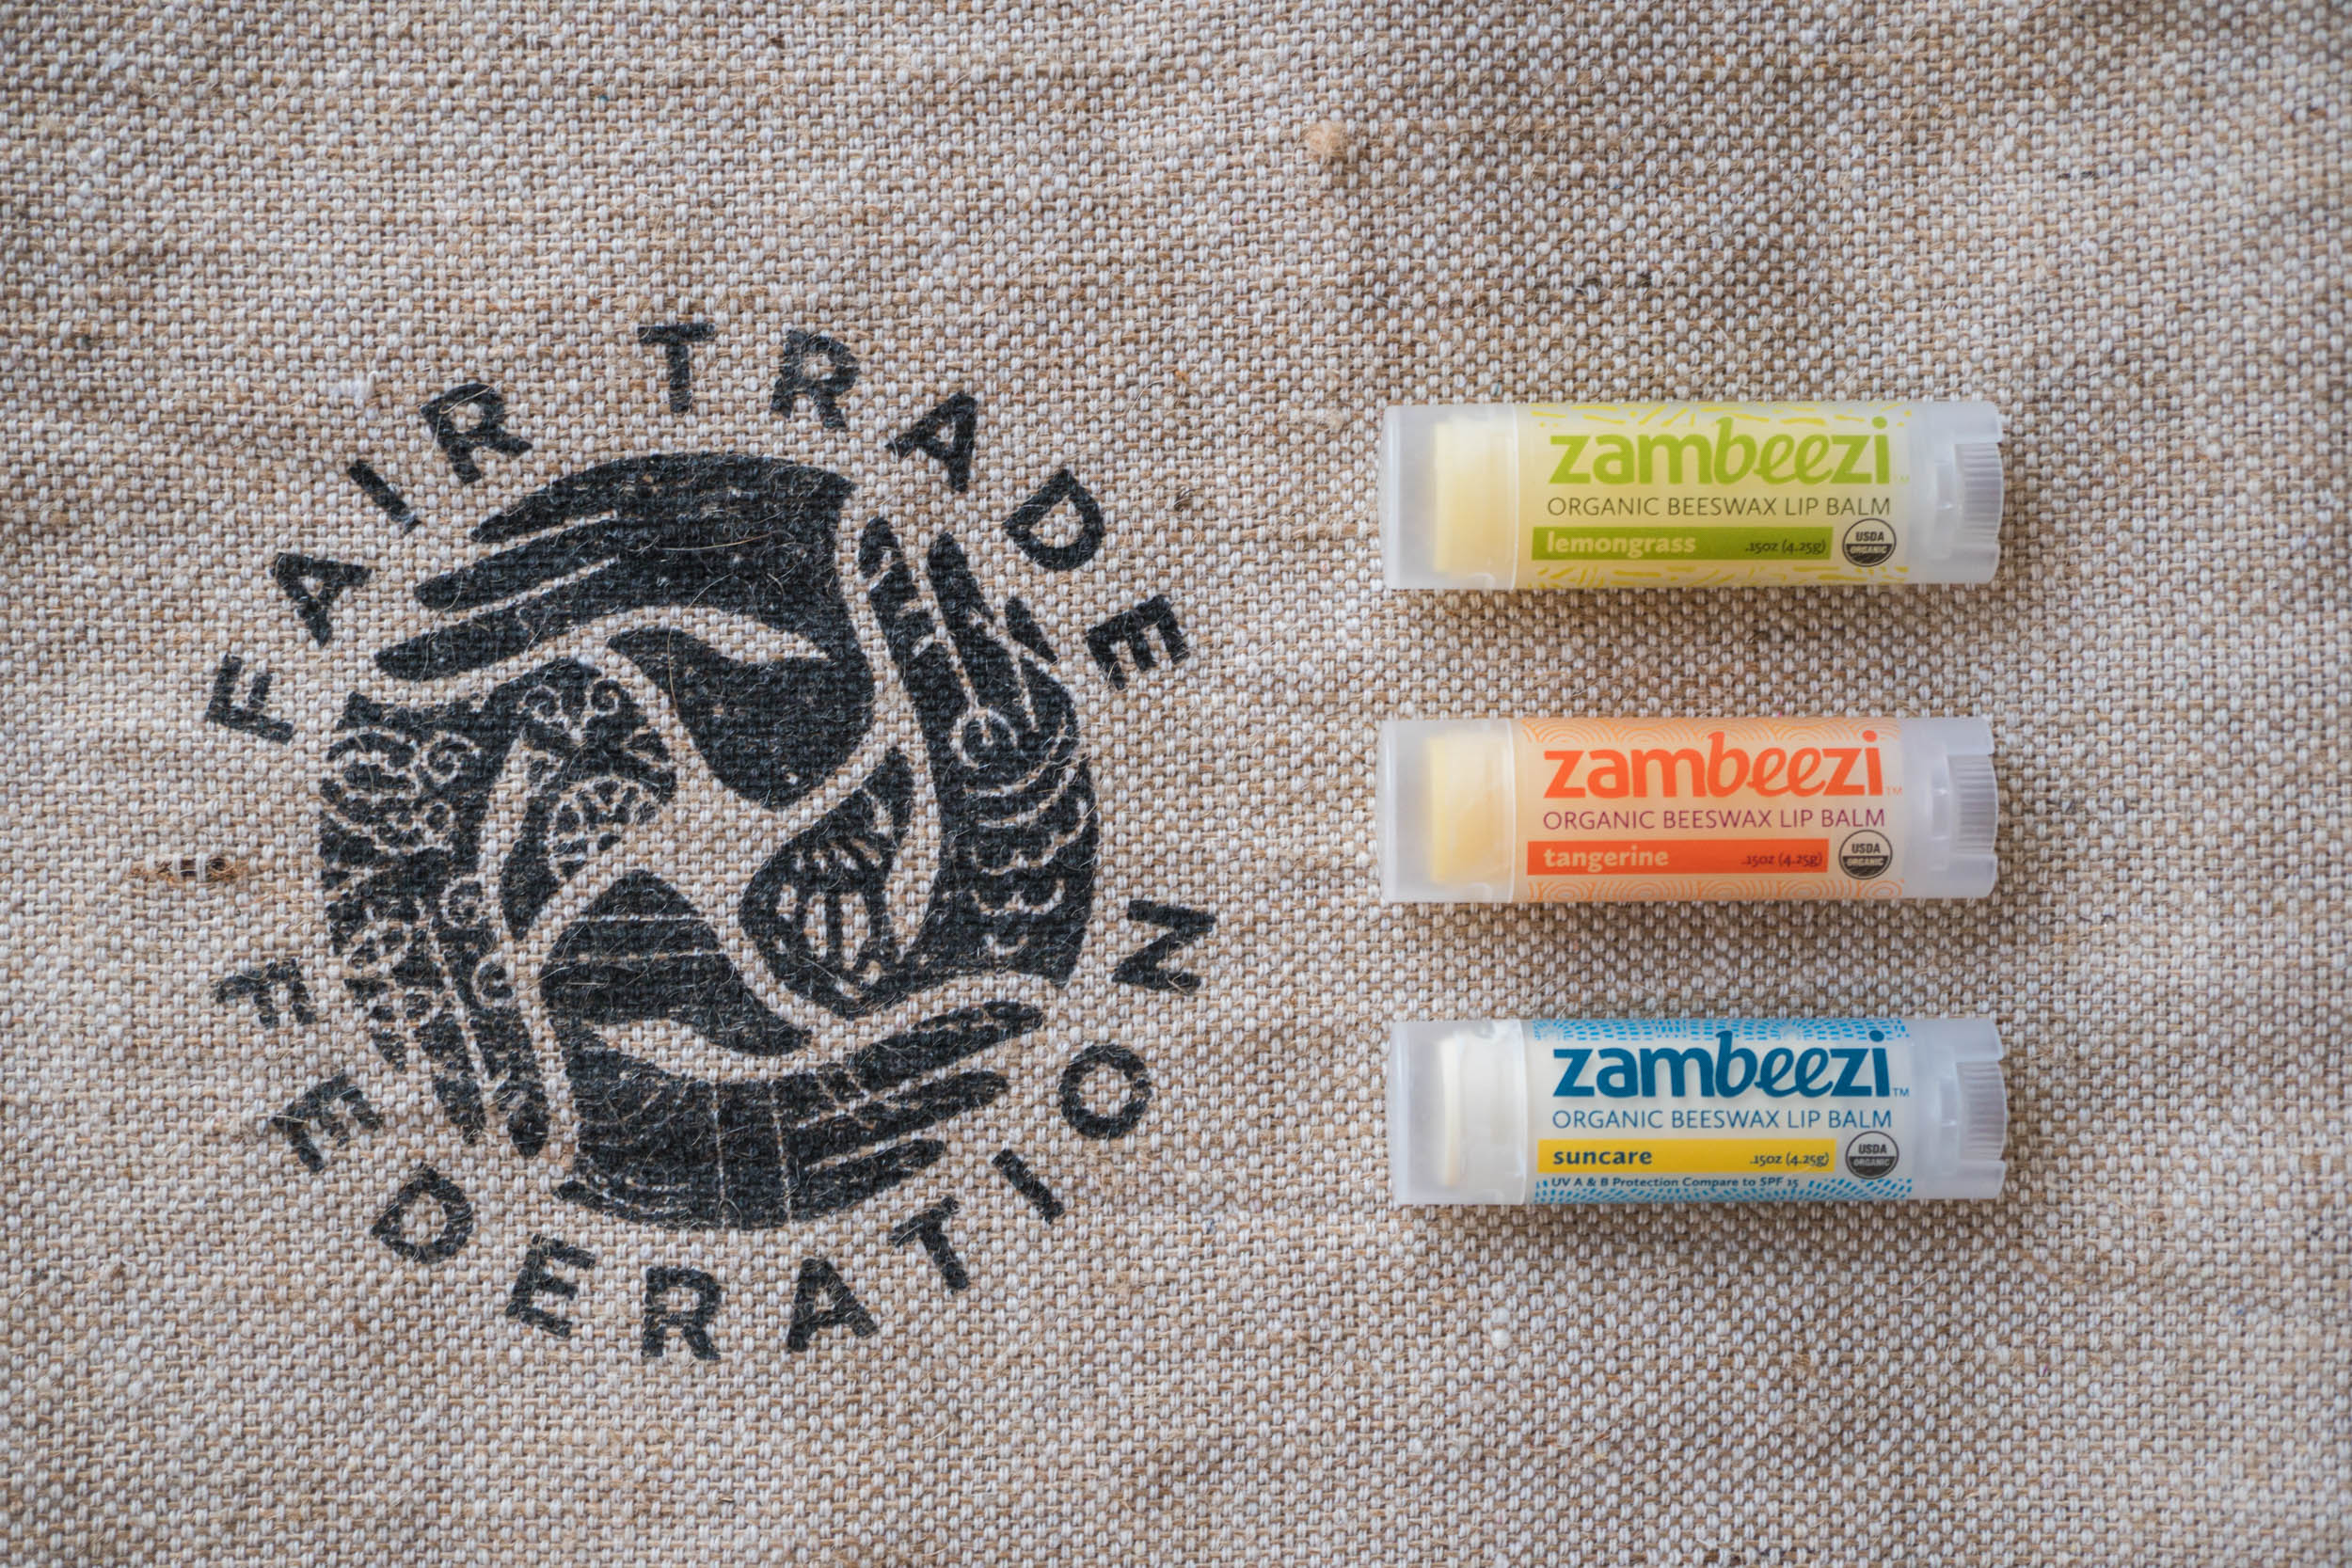 Fair Trade, Organic Beeswax lip balm crafted from the best ethically sourced ingredients.